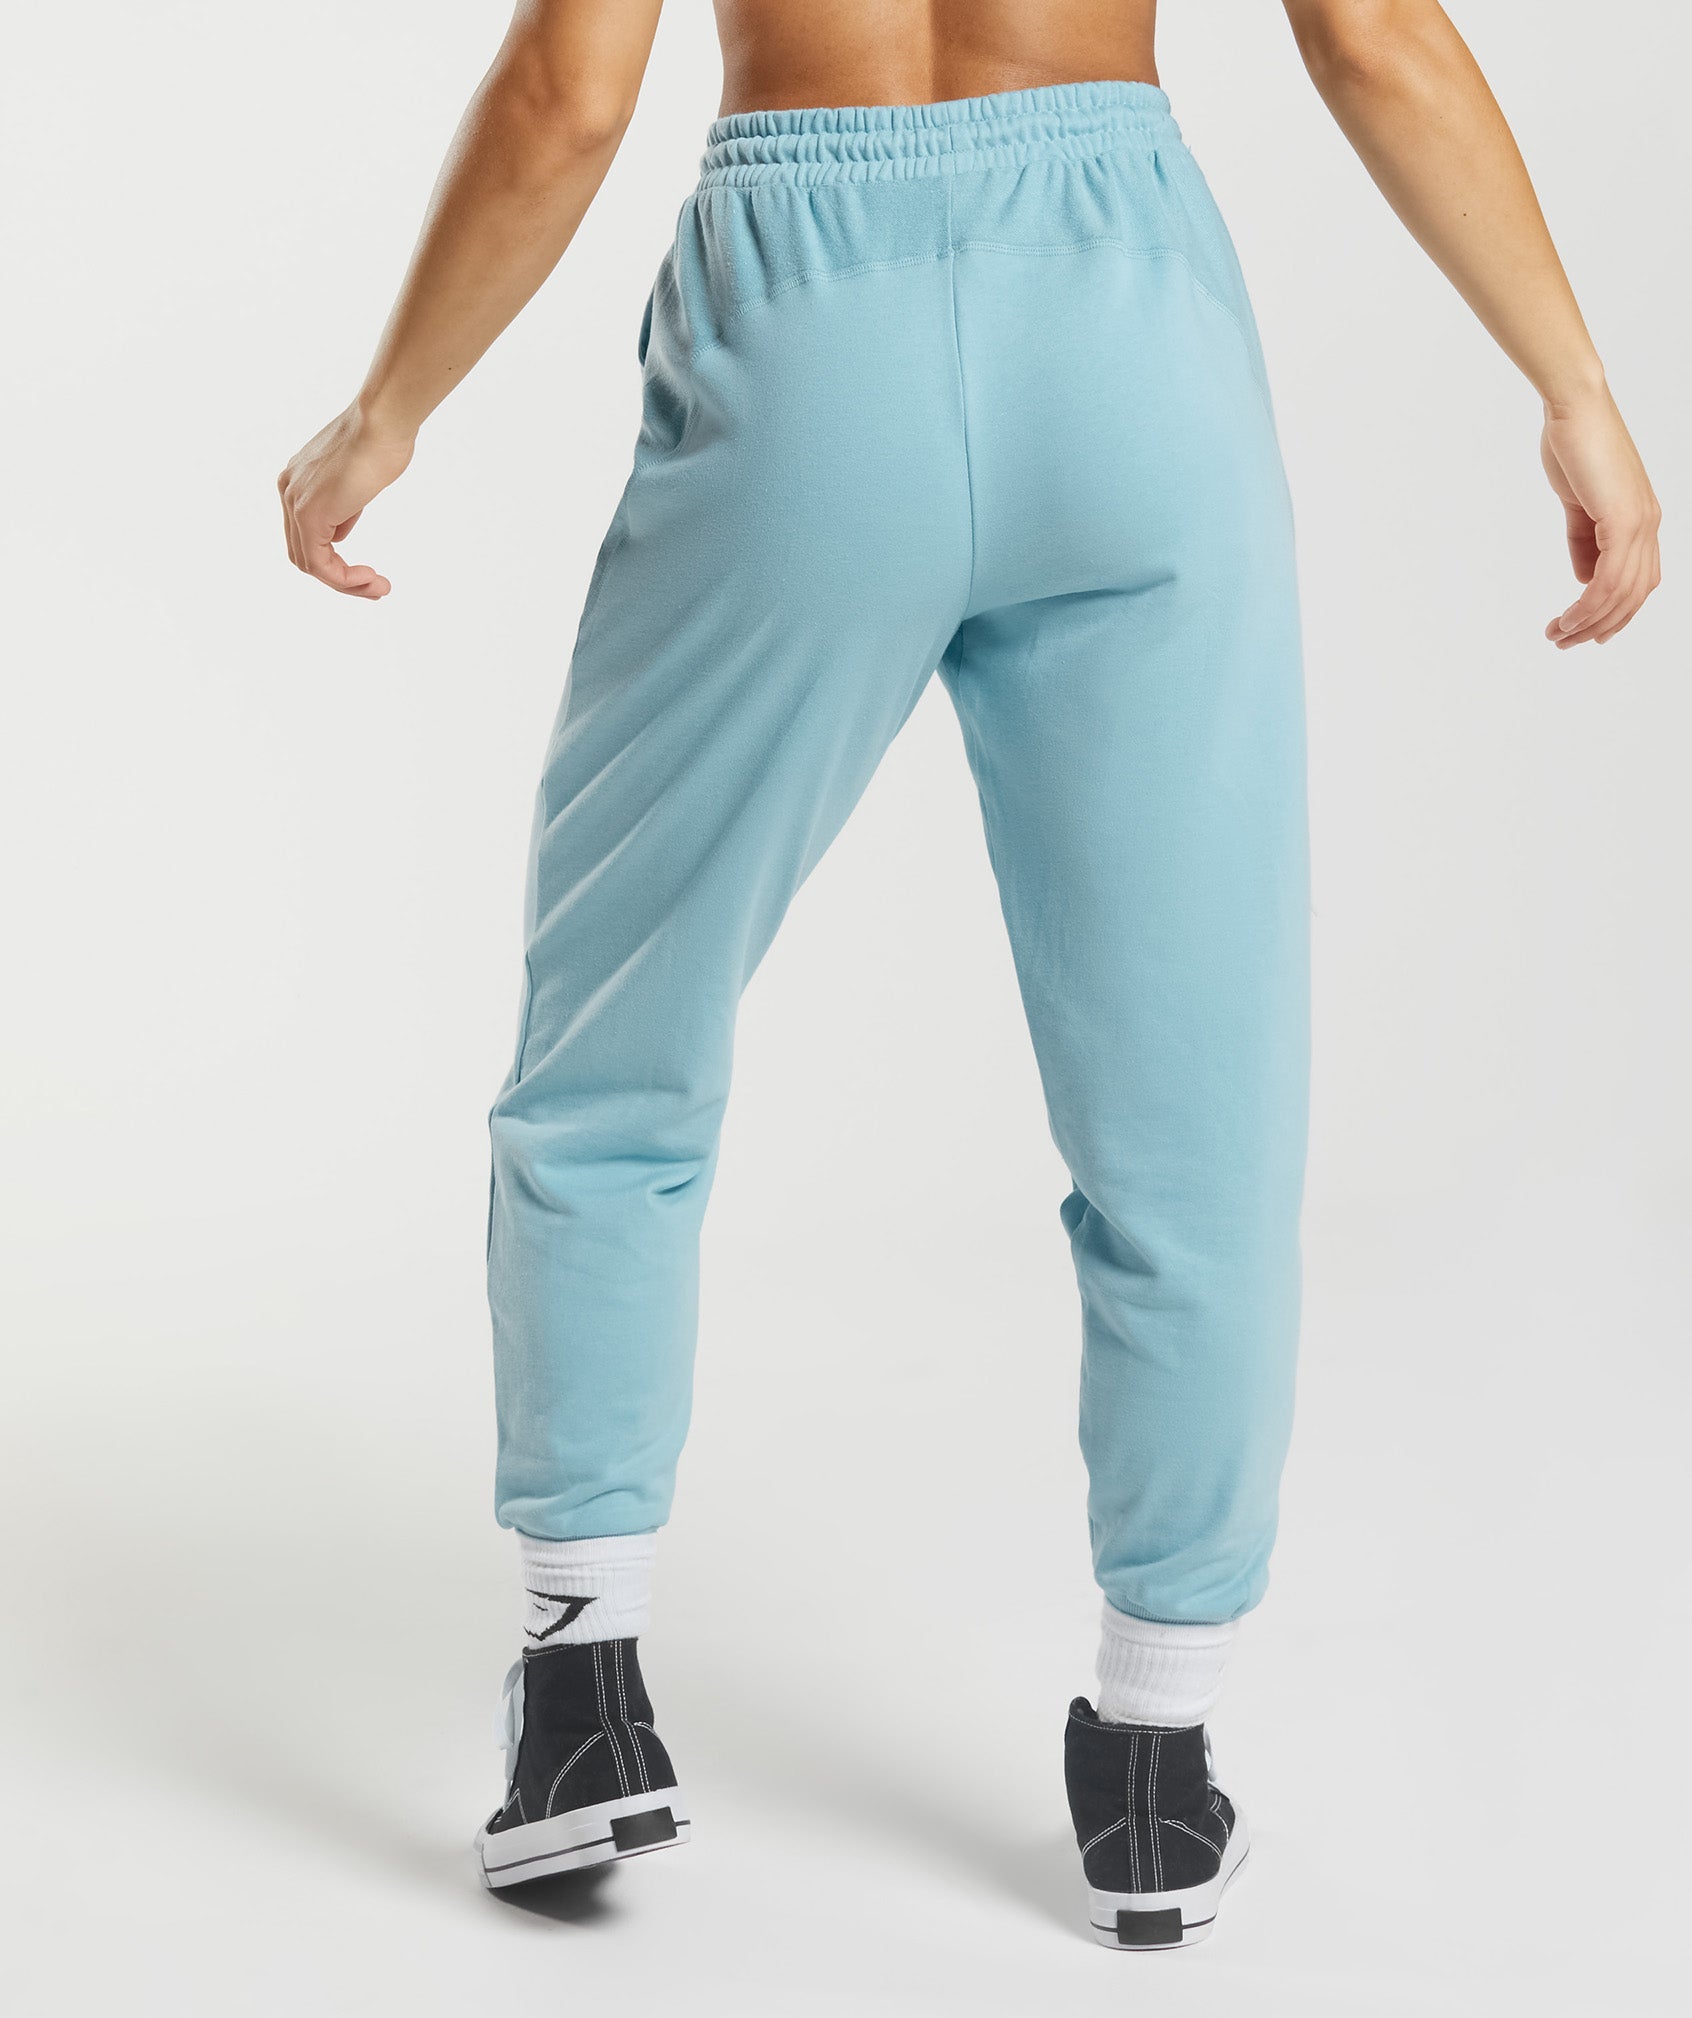 Gymshark GS Power Joggers Sale - Gymshark South Africa Stores